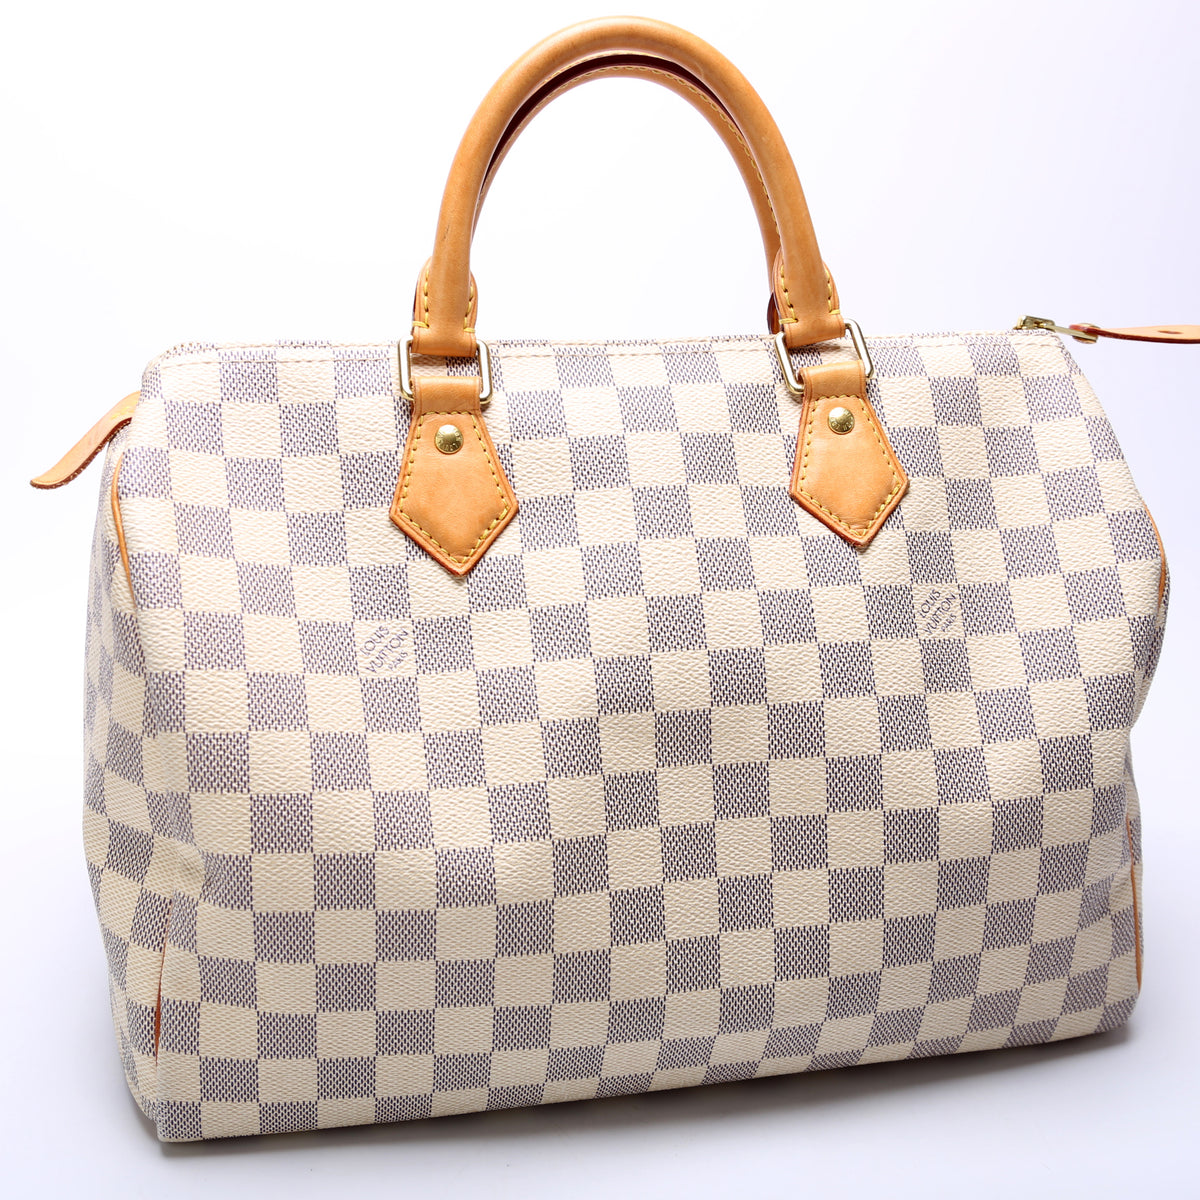 LOUIS VUITTON Sale, Up To 70% Off